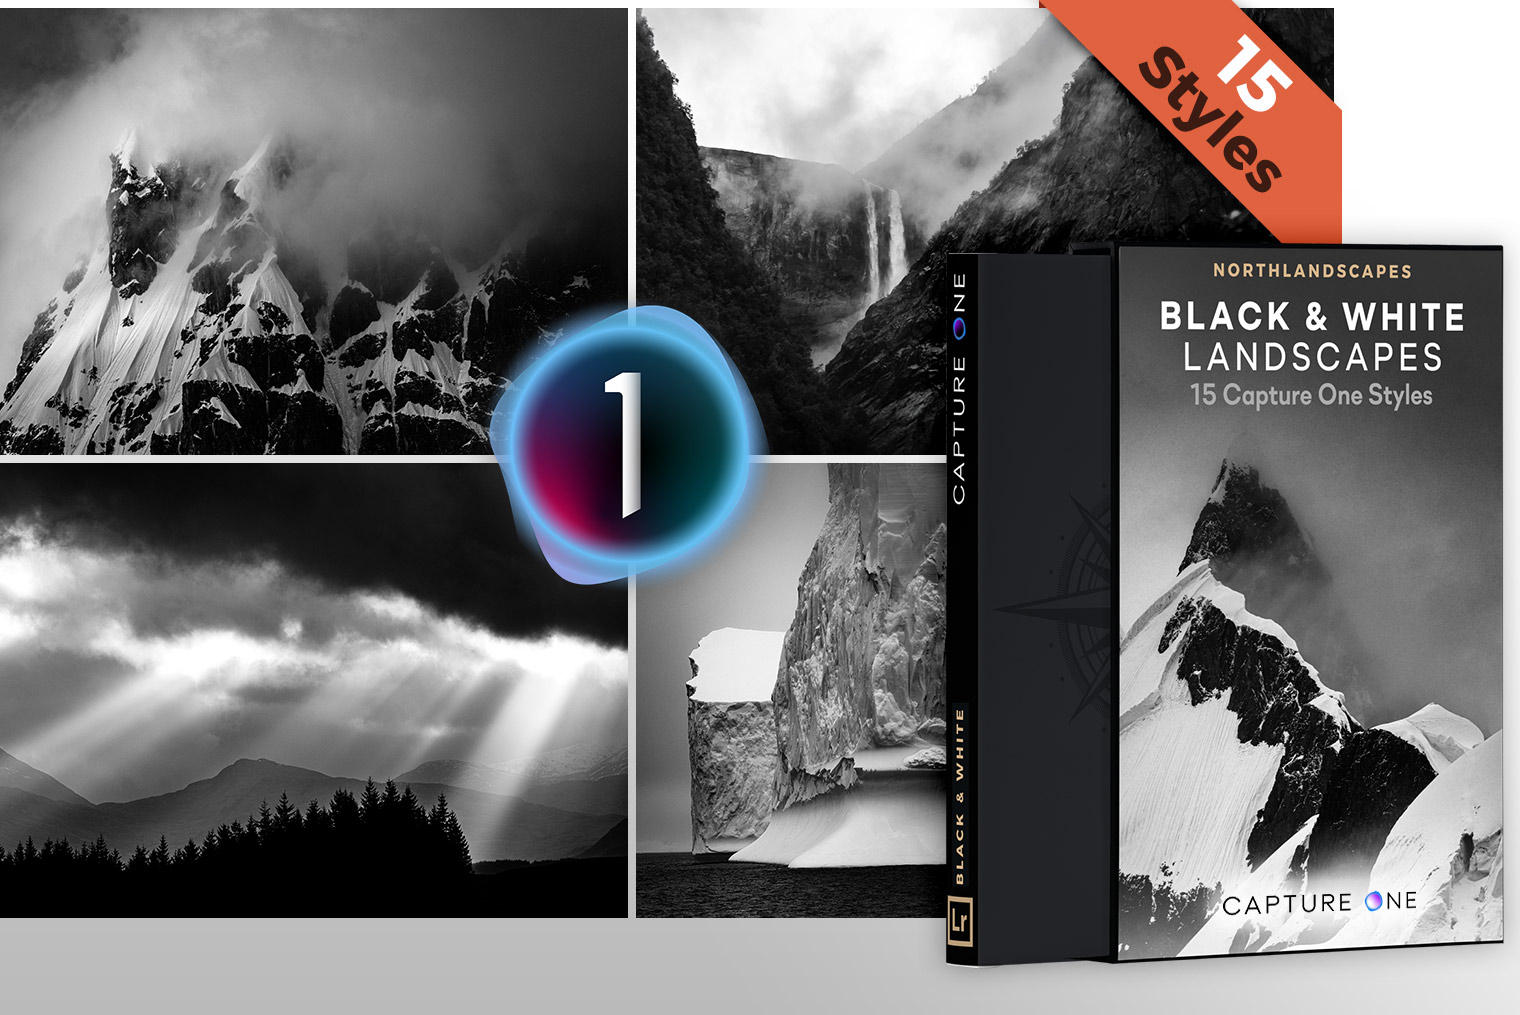 Capture One Styles for Black & White Landscape Photography